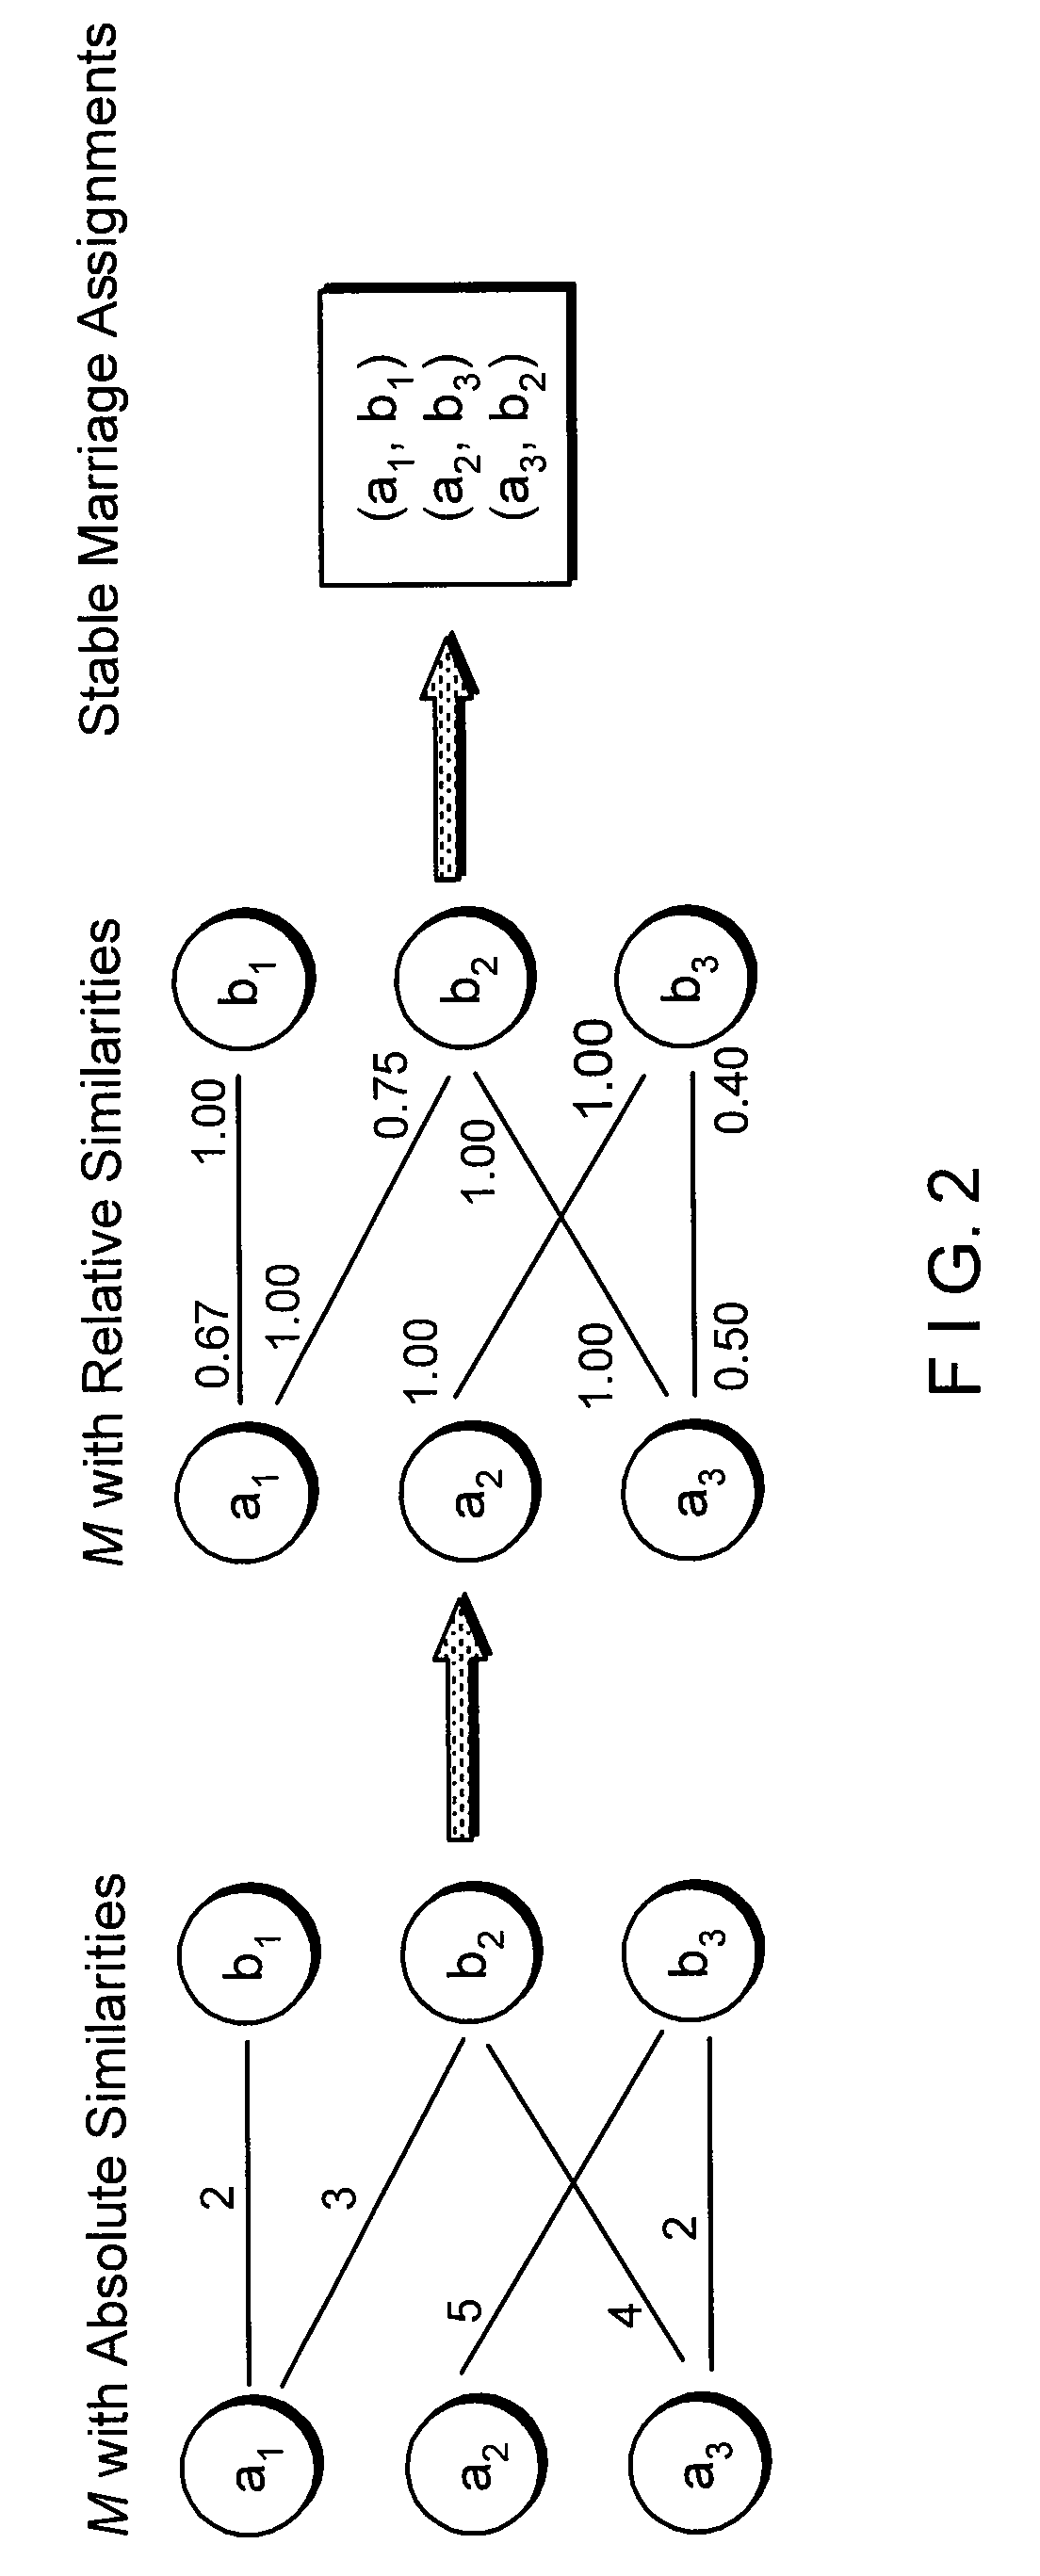 System and method for rapid searching of highly similar protein-coding sequences using bipartite graph matching